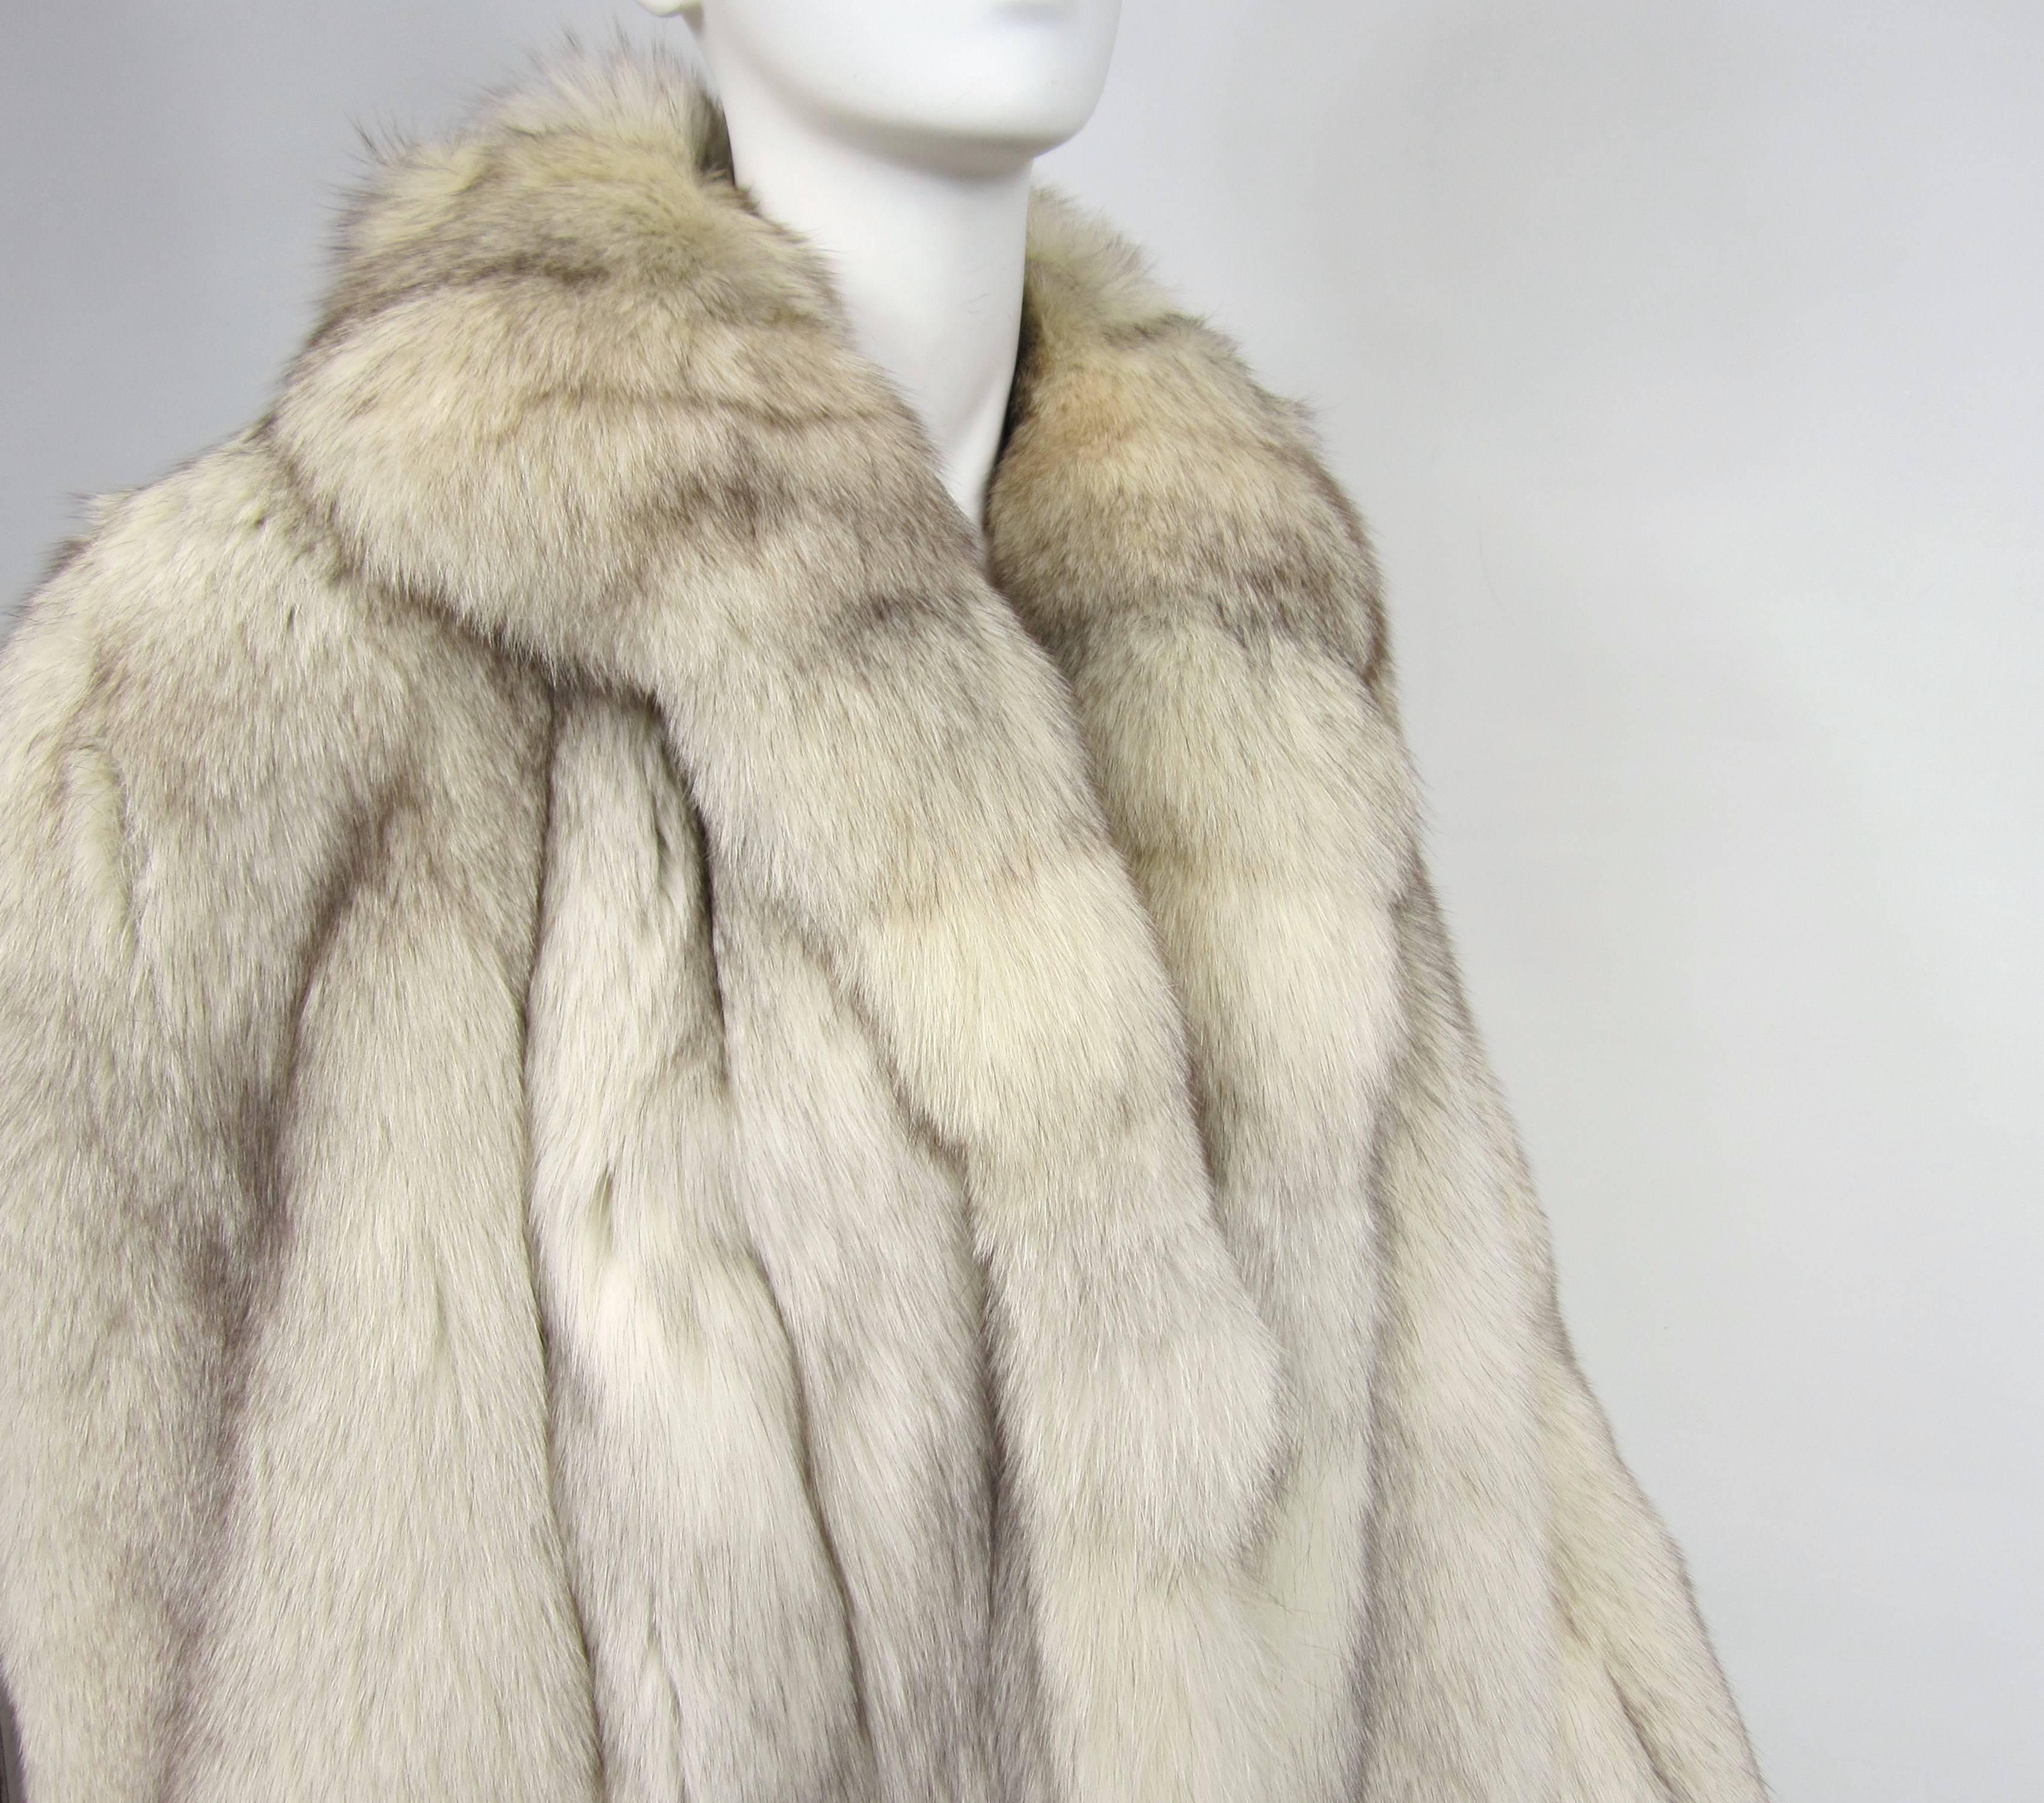 Large supple pelts on this full length Fox Coat with Slit side pockets Measurements Bust up to 40 / Waist up to 42 /Hips up to 44 / Sleeve 24.5 / Long 51--This will fit a 10-12 nicely. Be sure to check out our store front for many more fur including